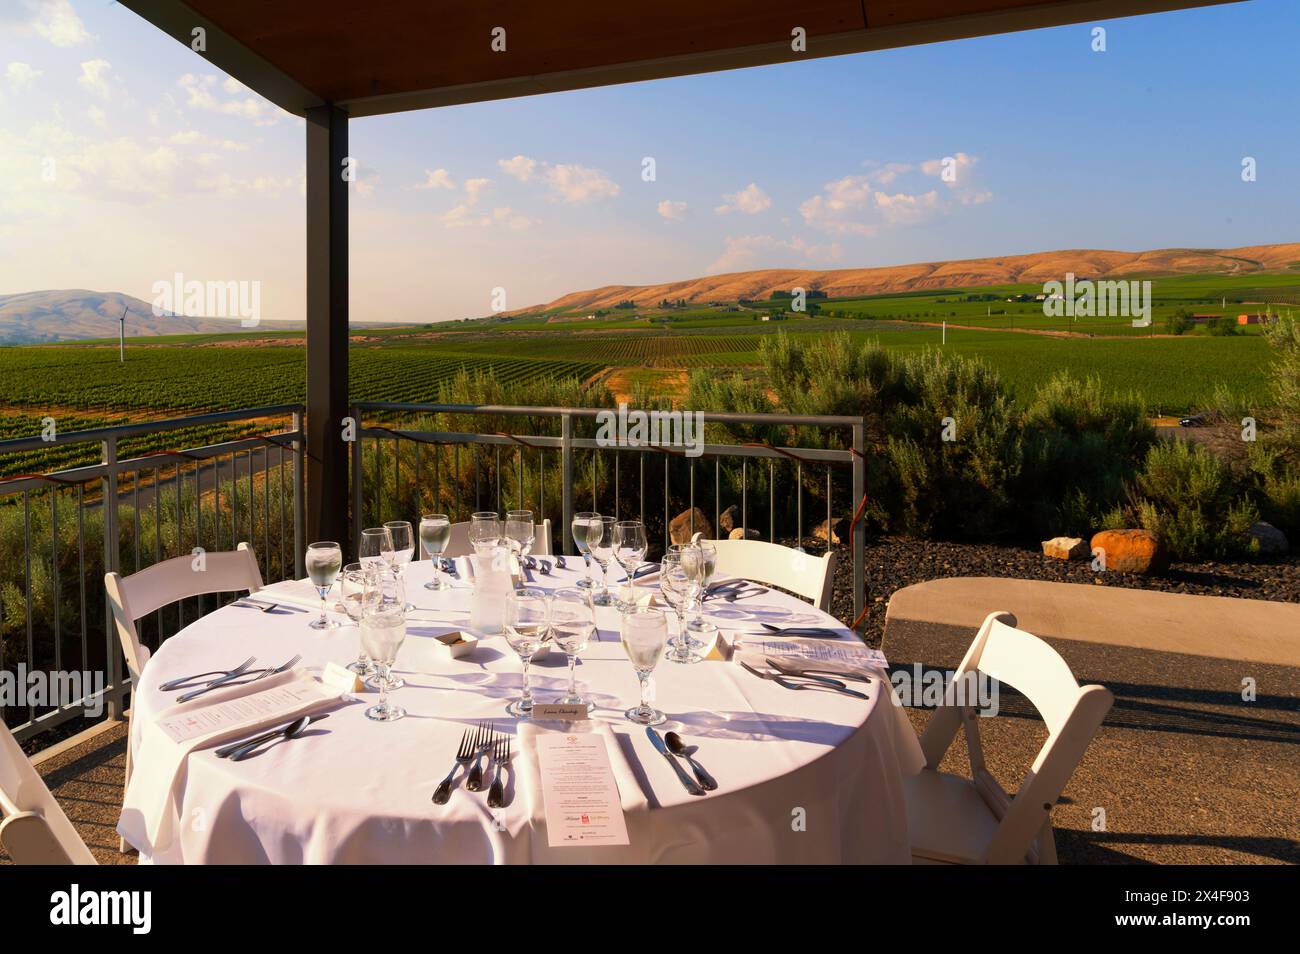 USA, Washington State, Red Mountain. Dusk on a Winemaker dinner at Kiona Winery and Vineyards on Red Mountain. (Editorial Use Only) Stock Photo